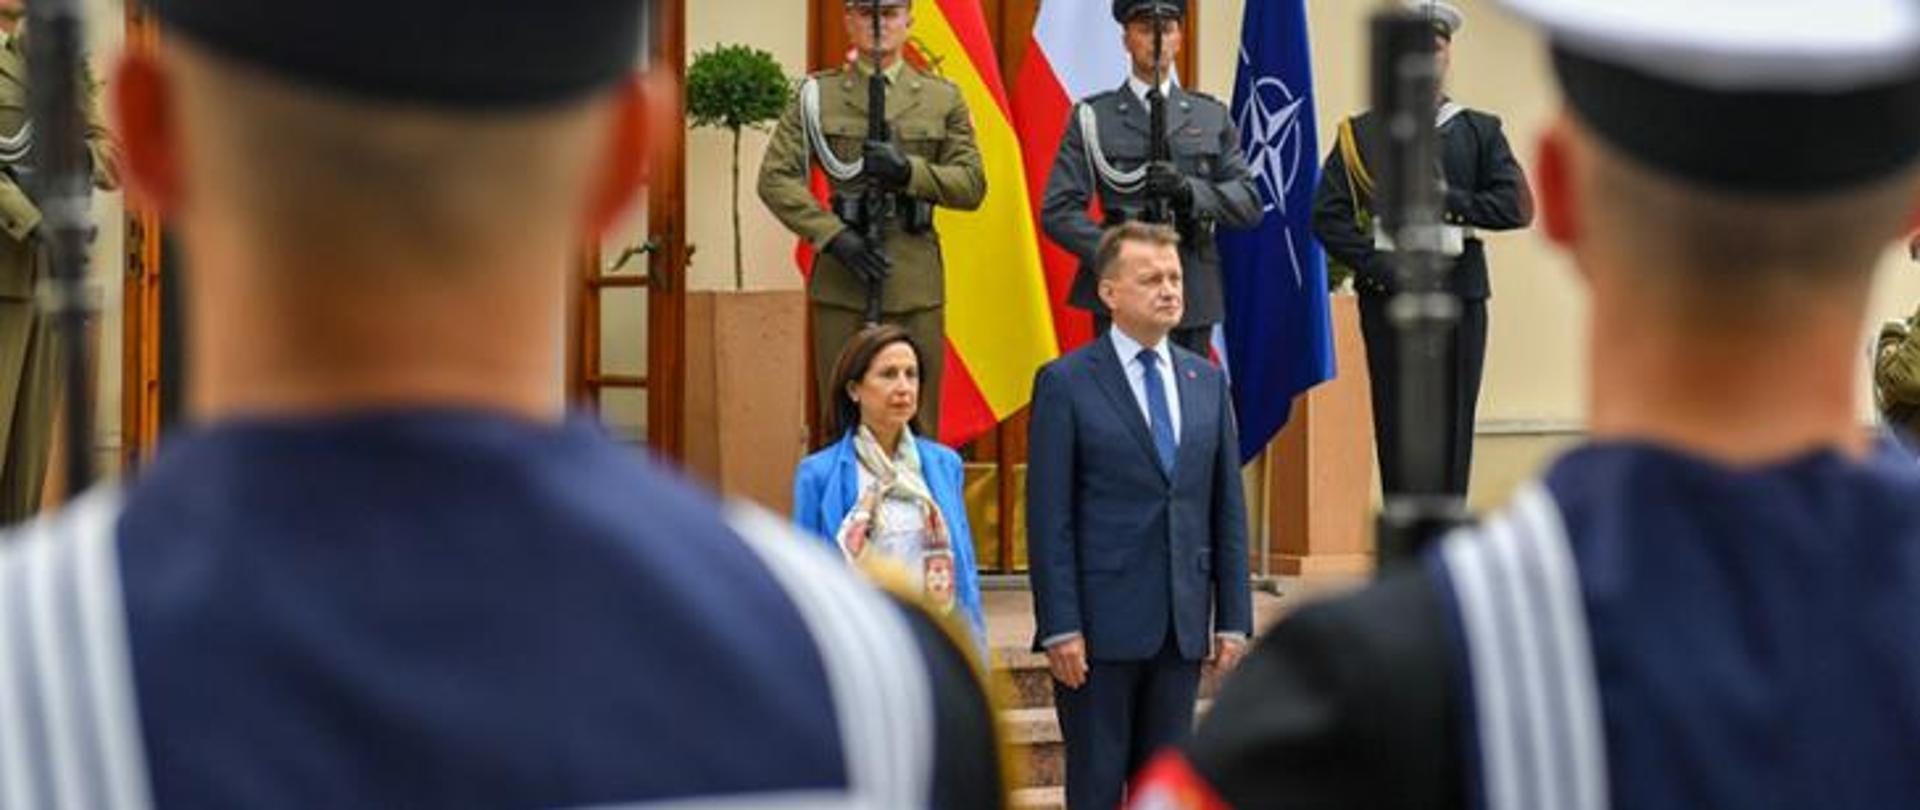 Poland and Spain with a new agreement on cooperation in the field of defence_zajawka